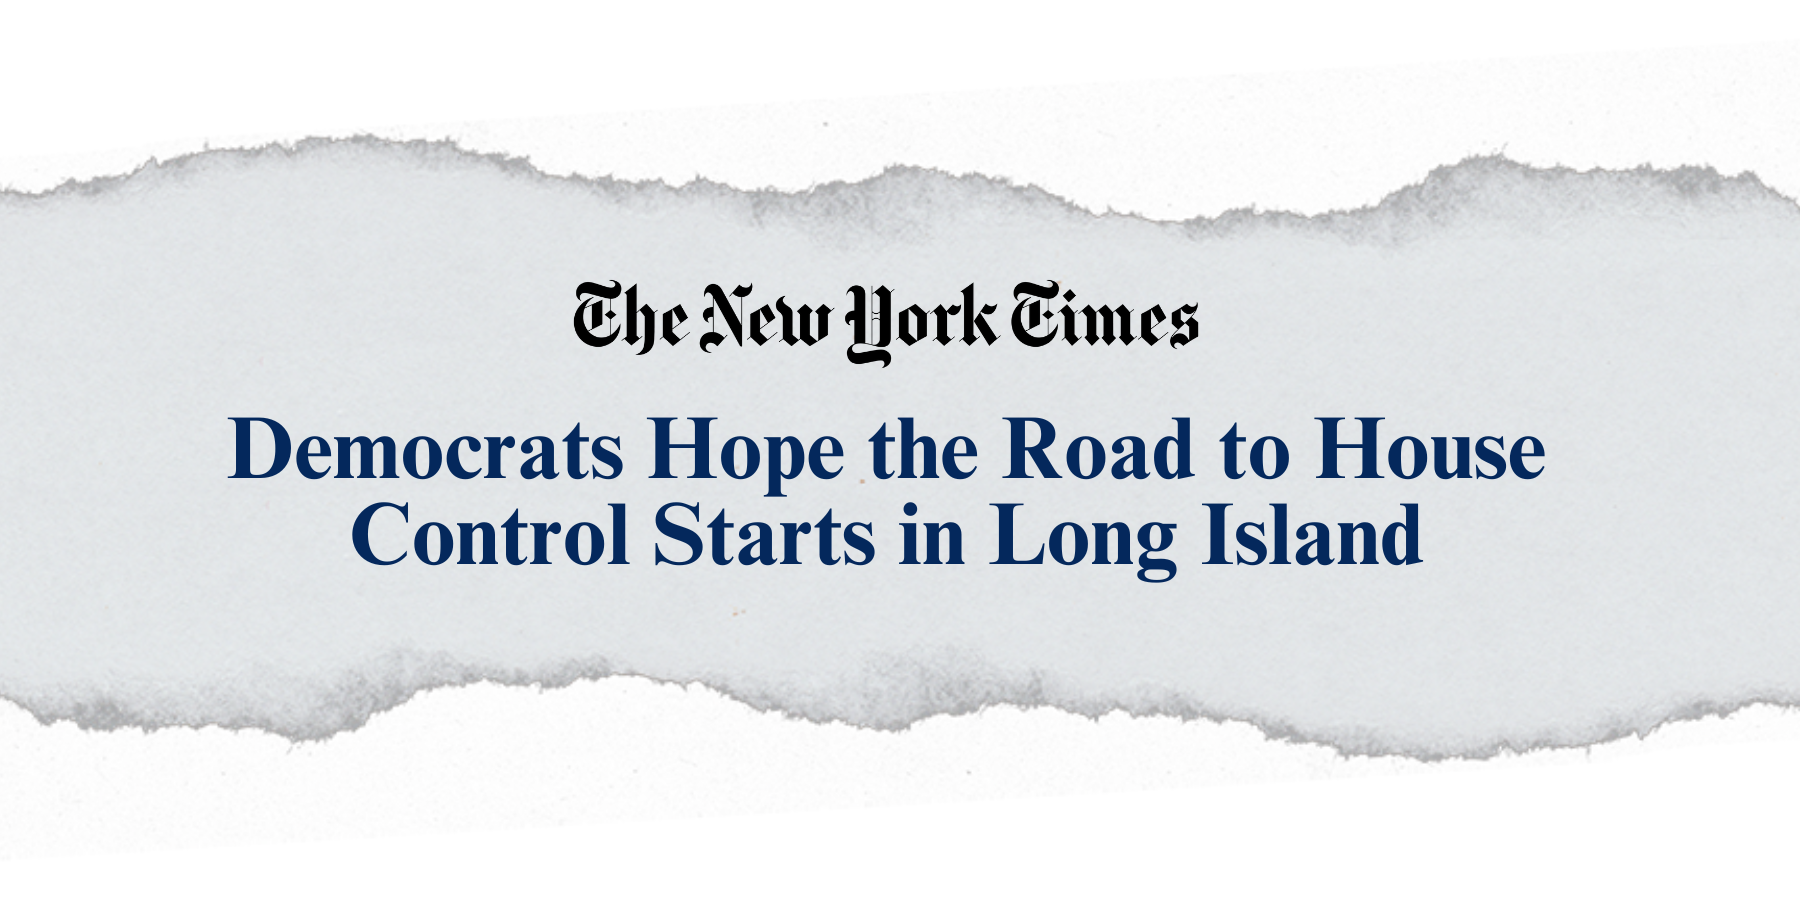 "Democrats hope the road to House control starts on Long Island" –The New York Times